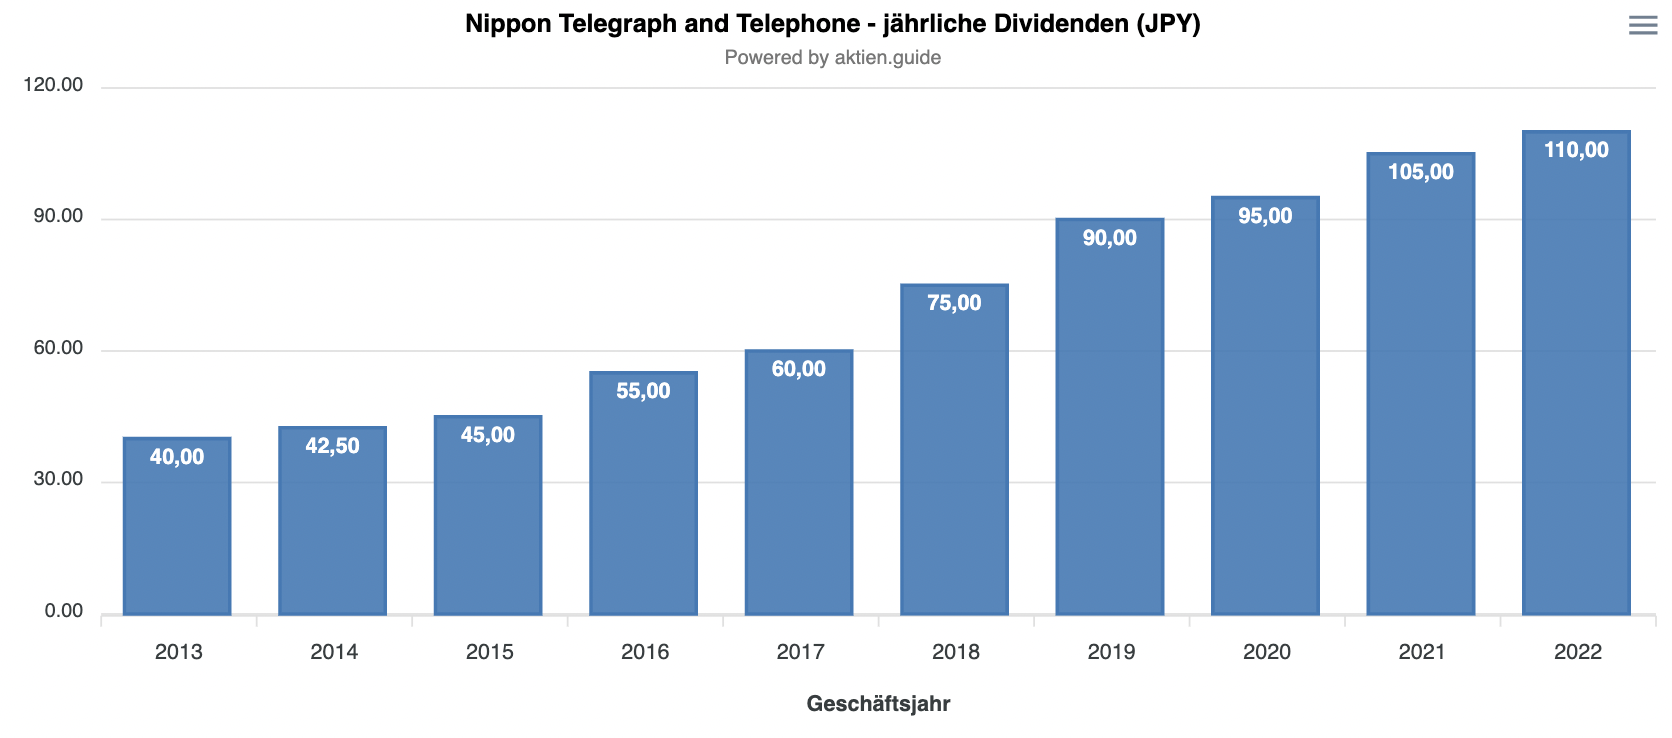 Nippon Telegraph and Telephone Dividenden